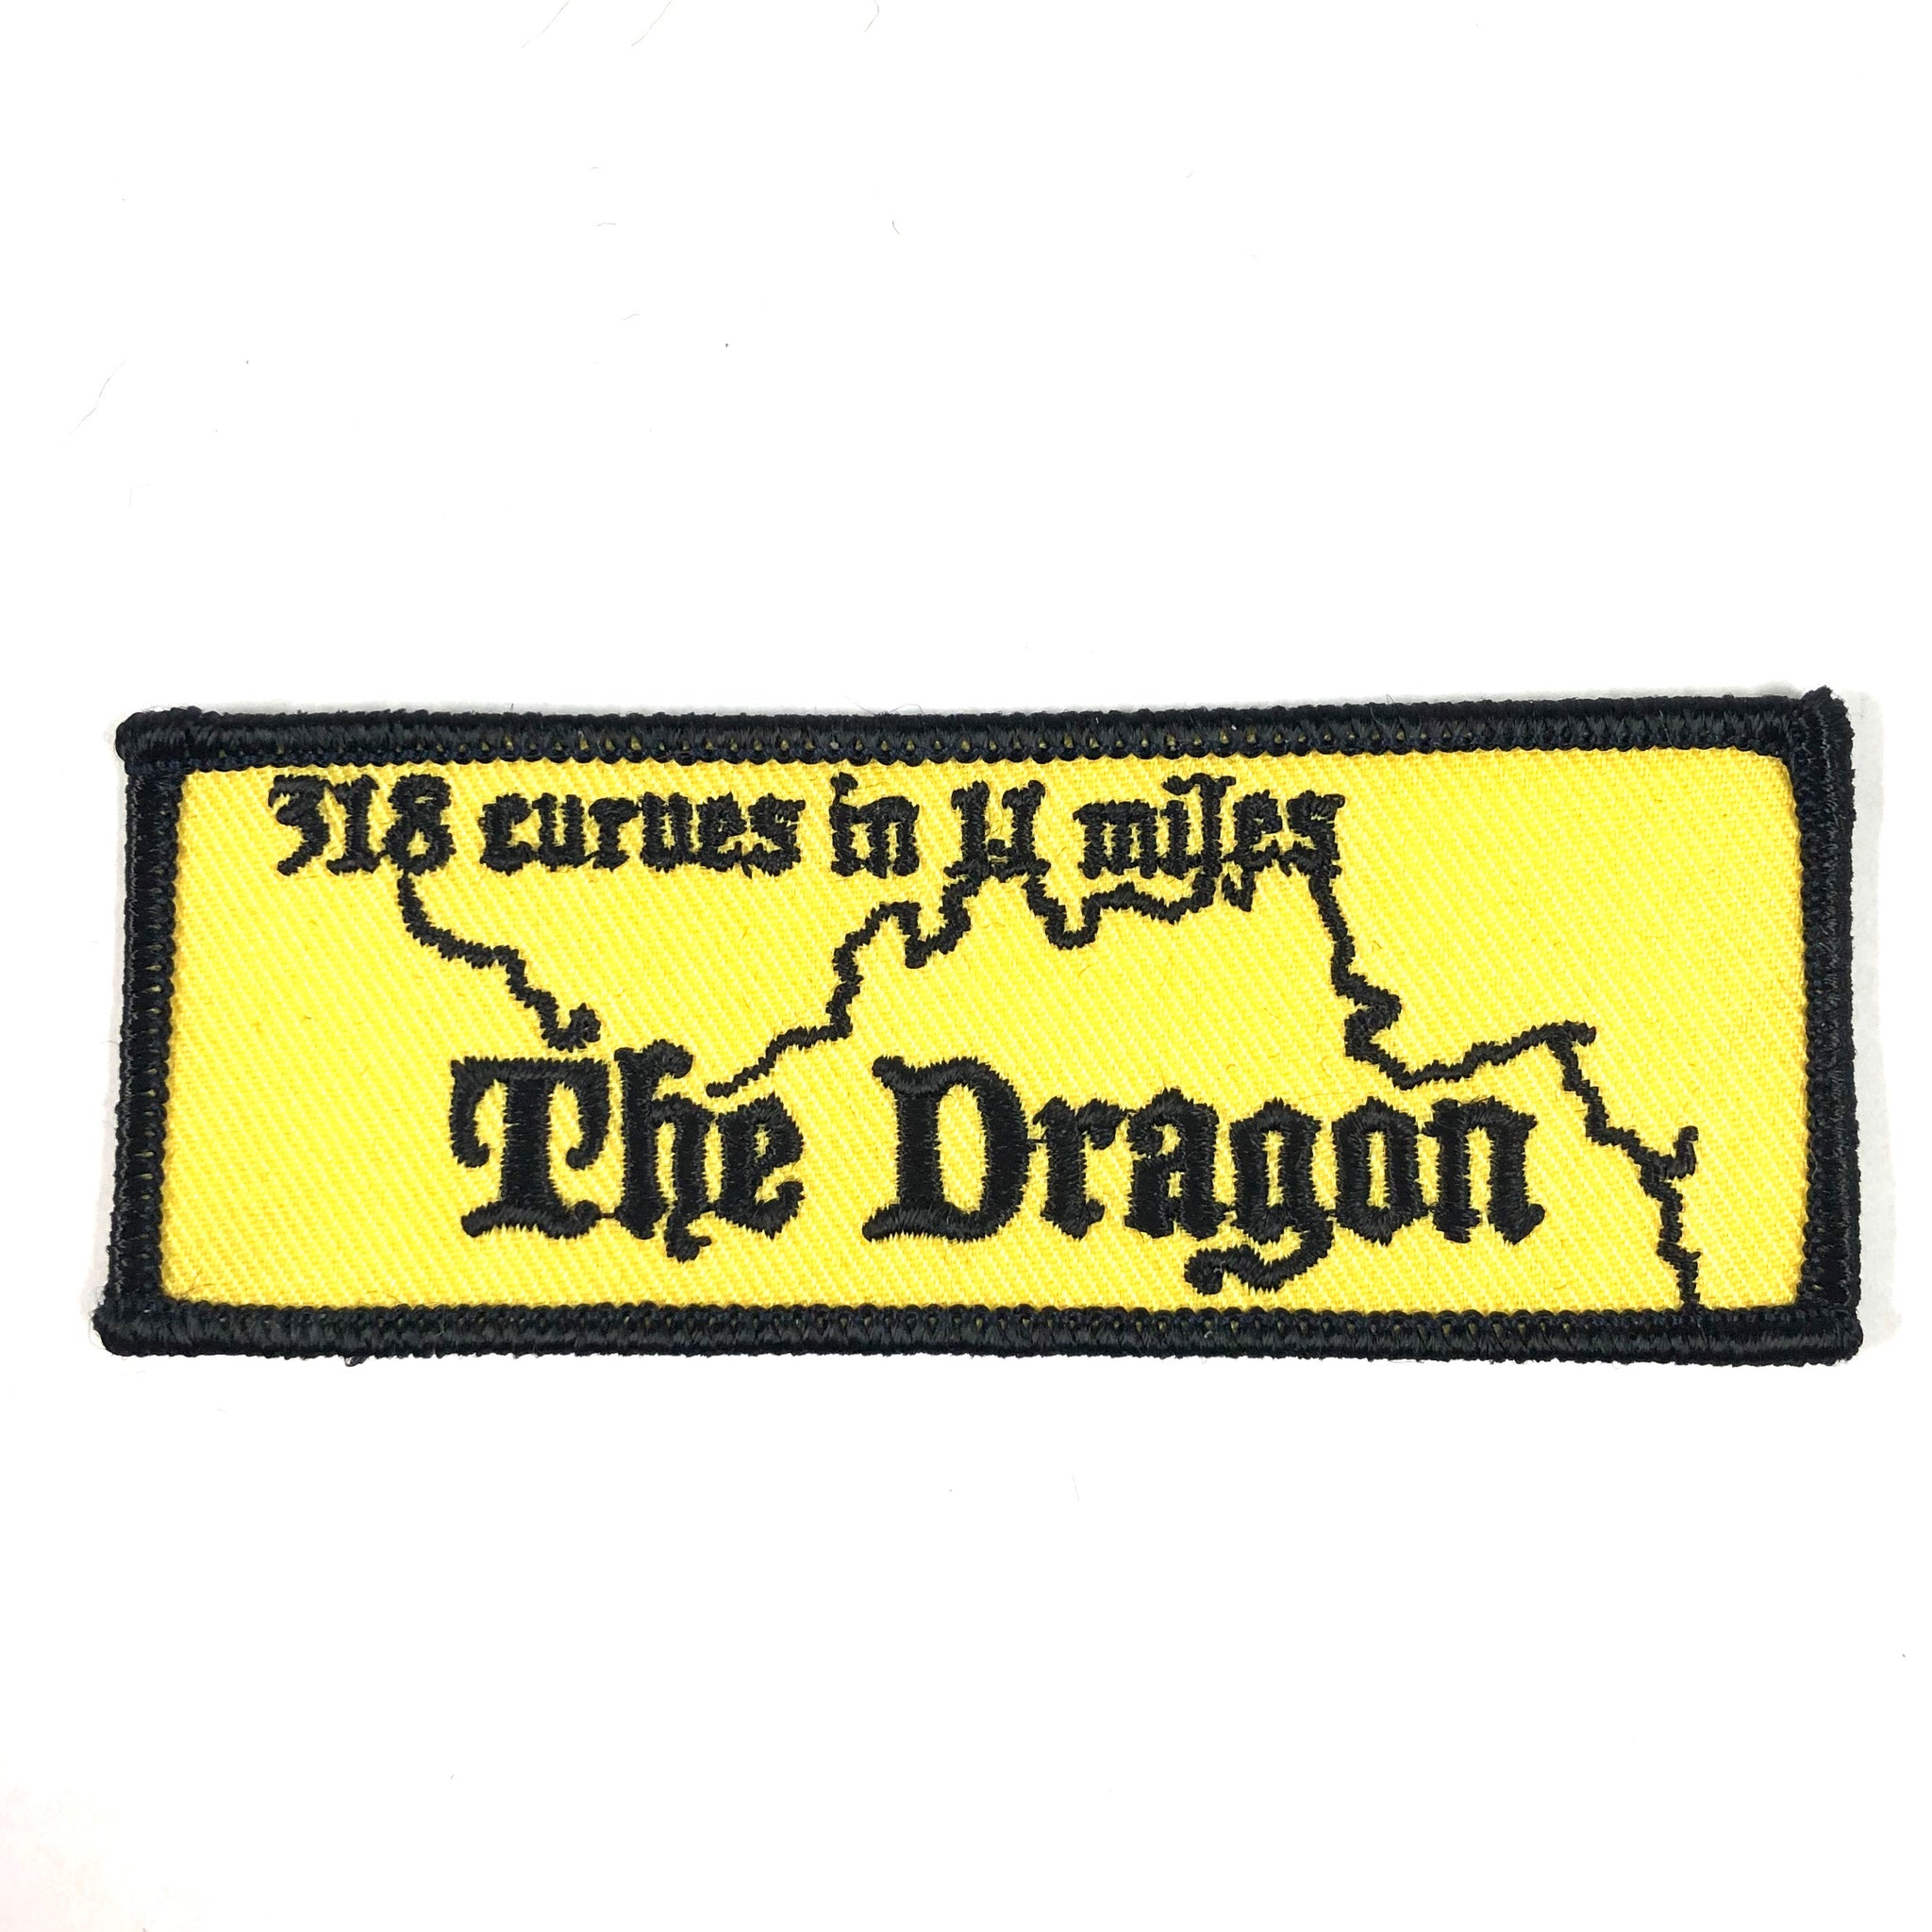 Dragon Road Outline Patch